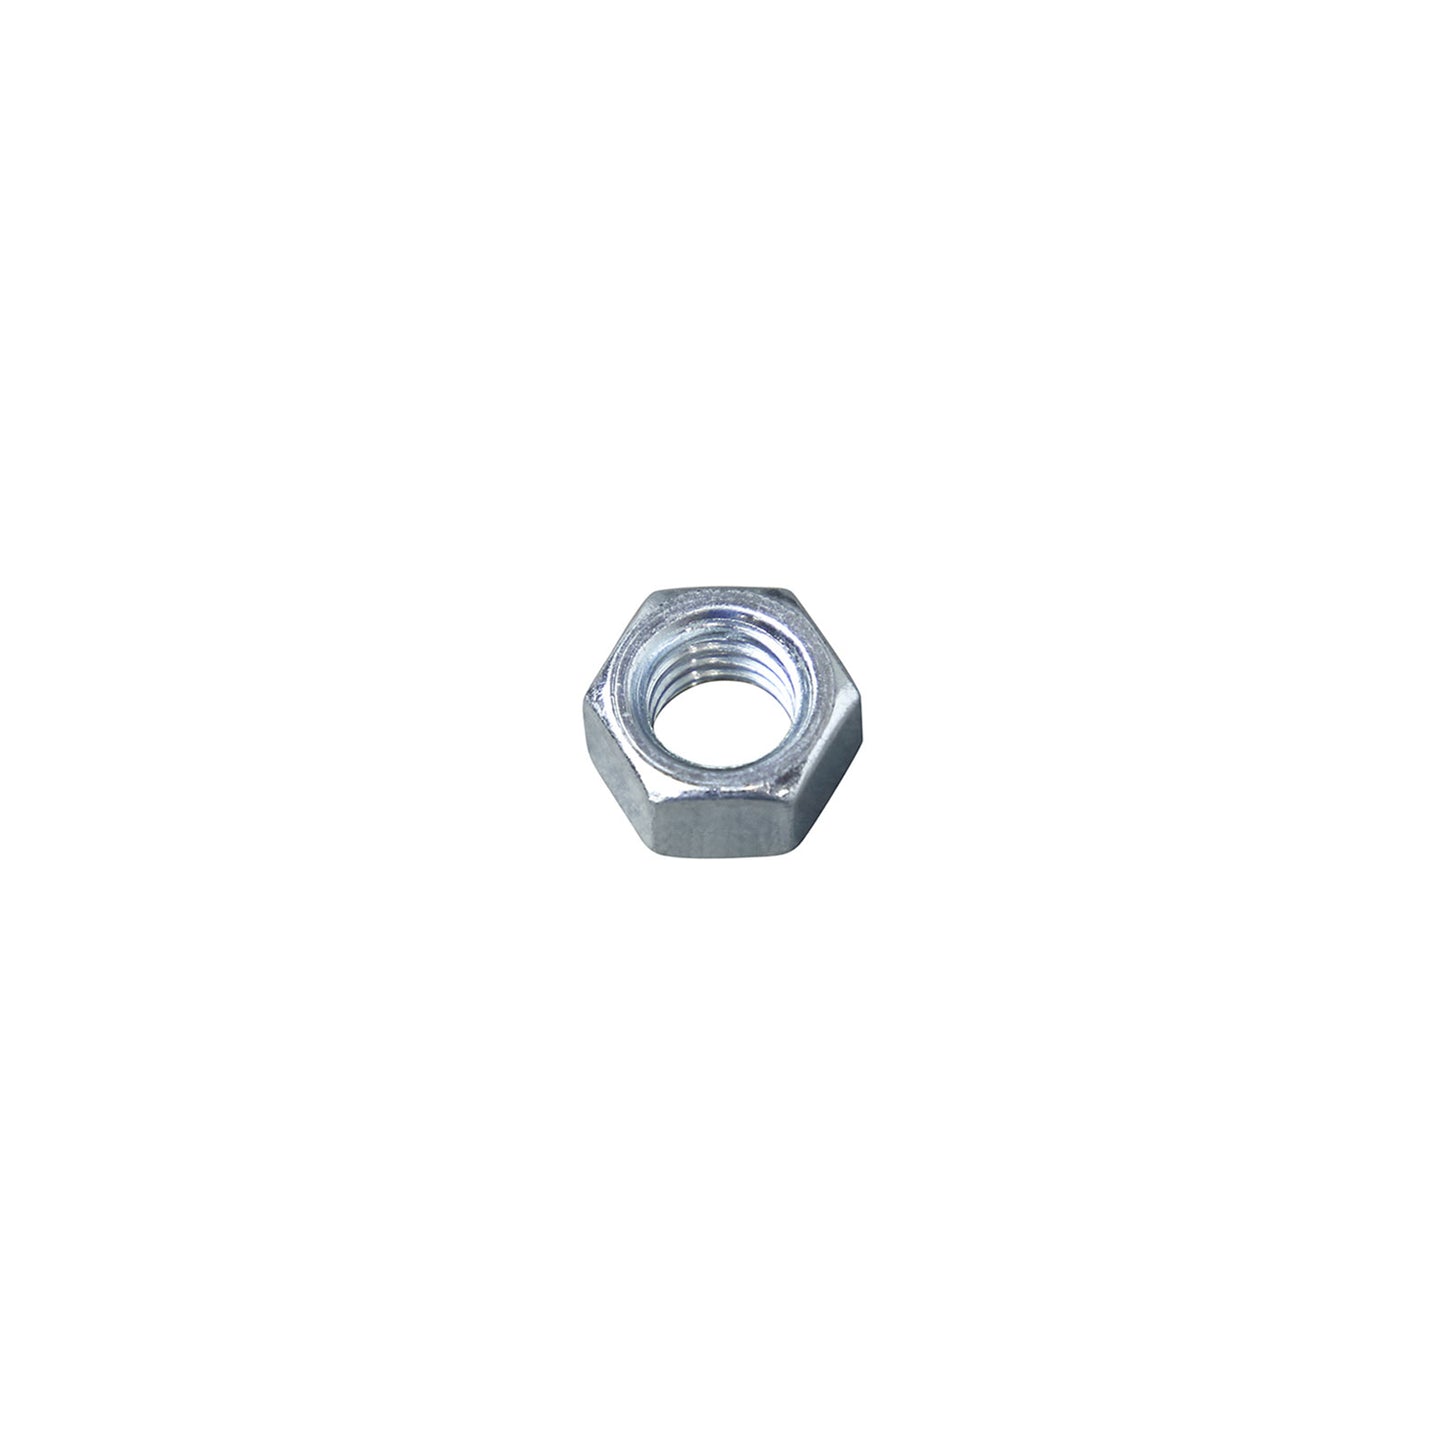 3/8"-16 Conquest Hex Nut - Zinc Plated